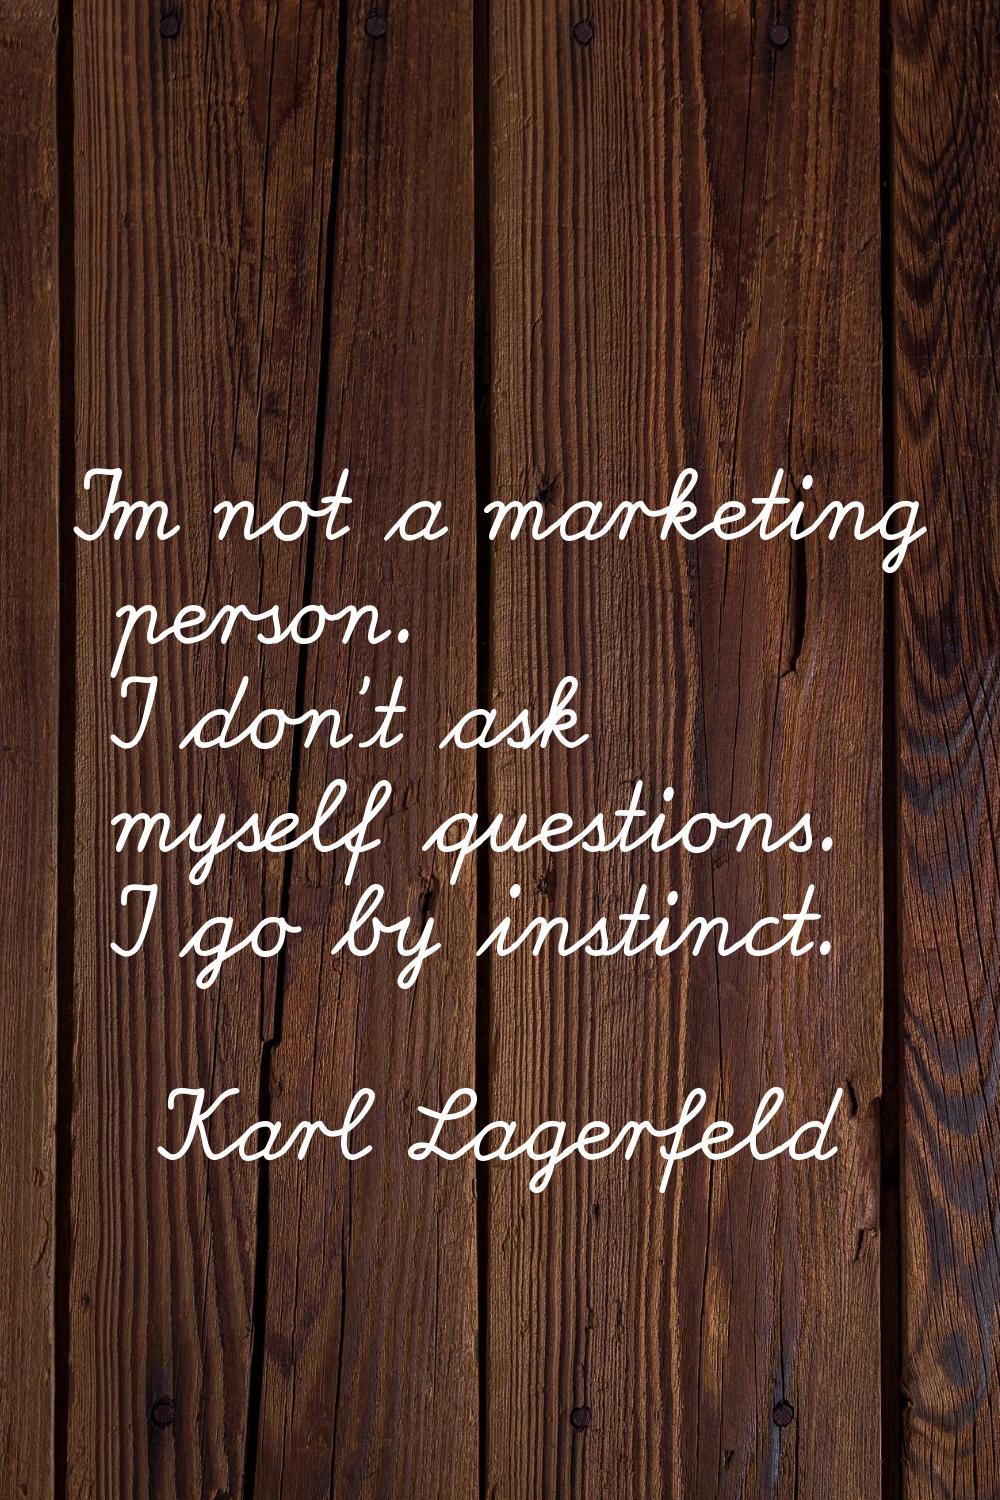 I'm not a marketing person. I don't ask myself questions. I go by instinct.